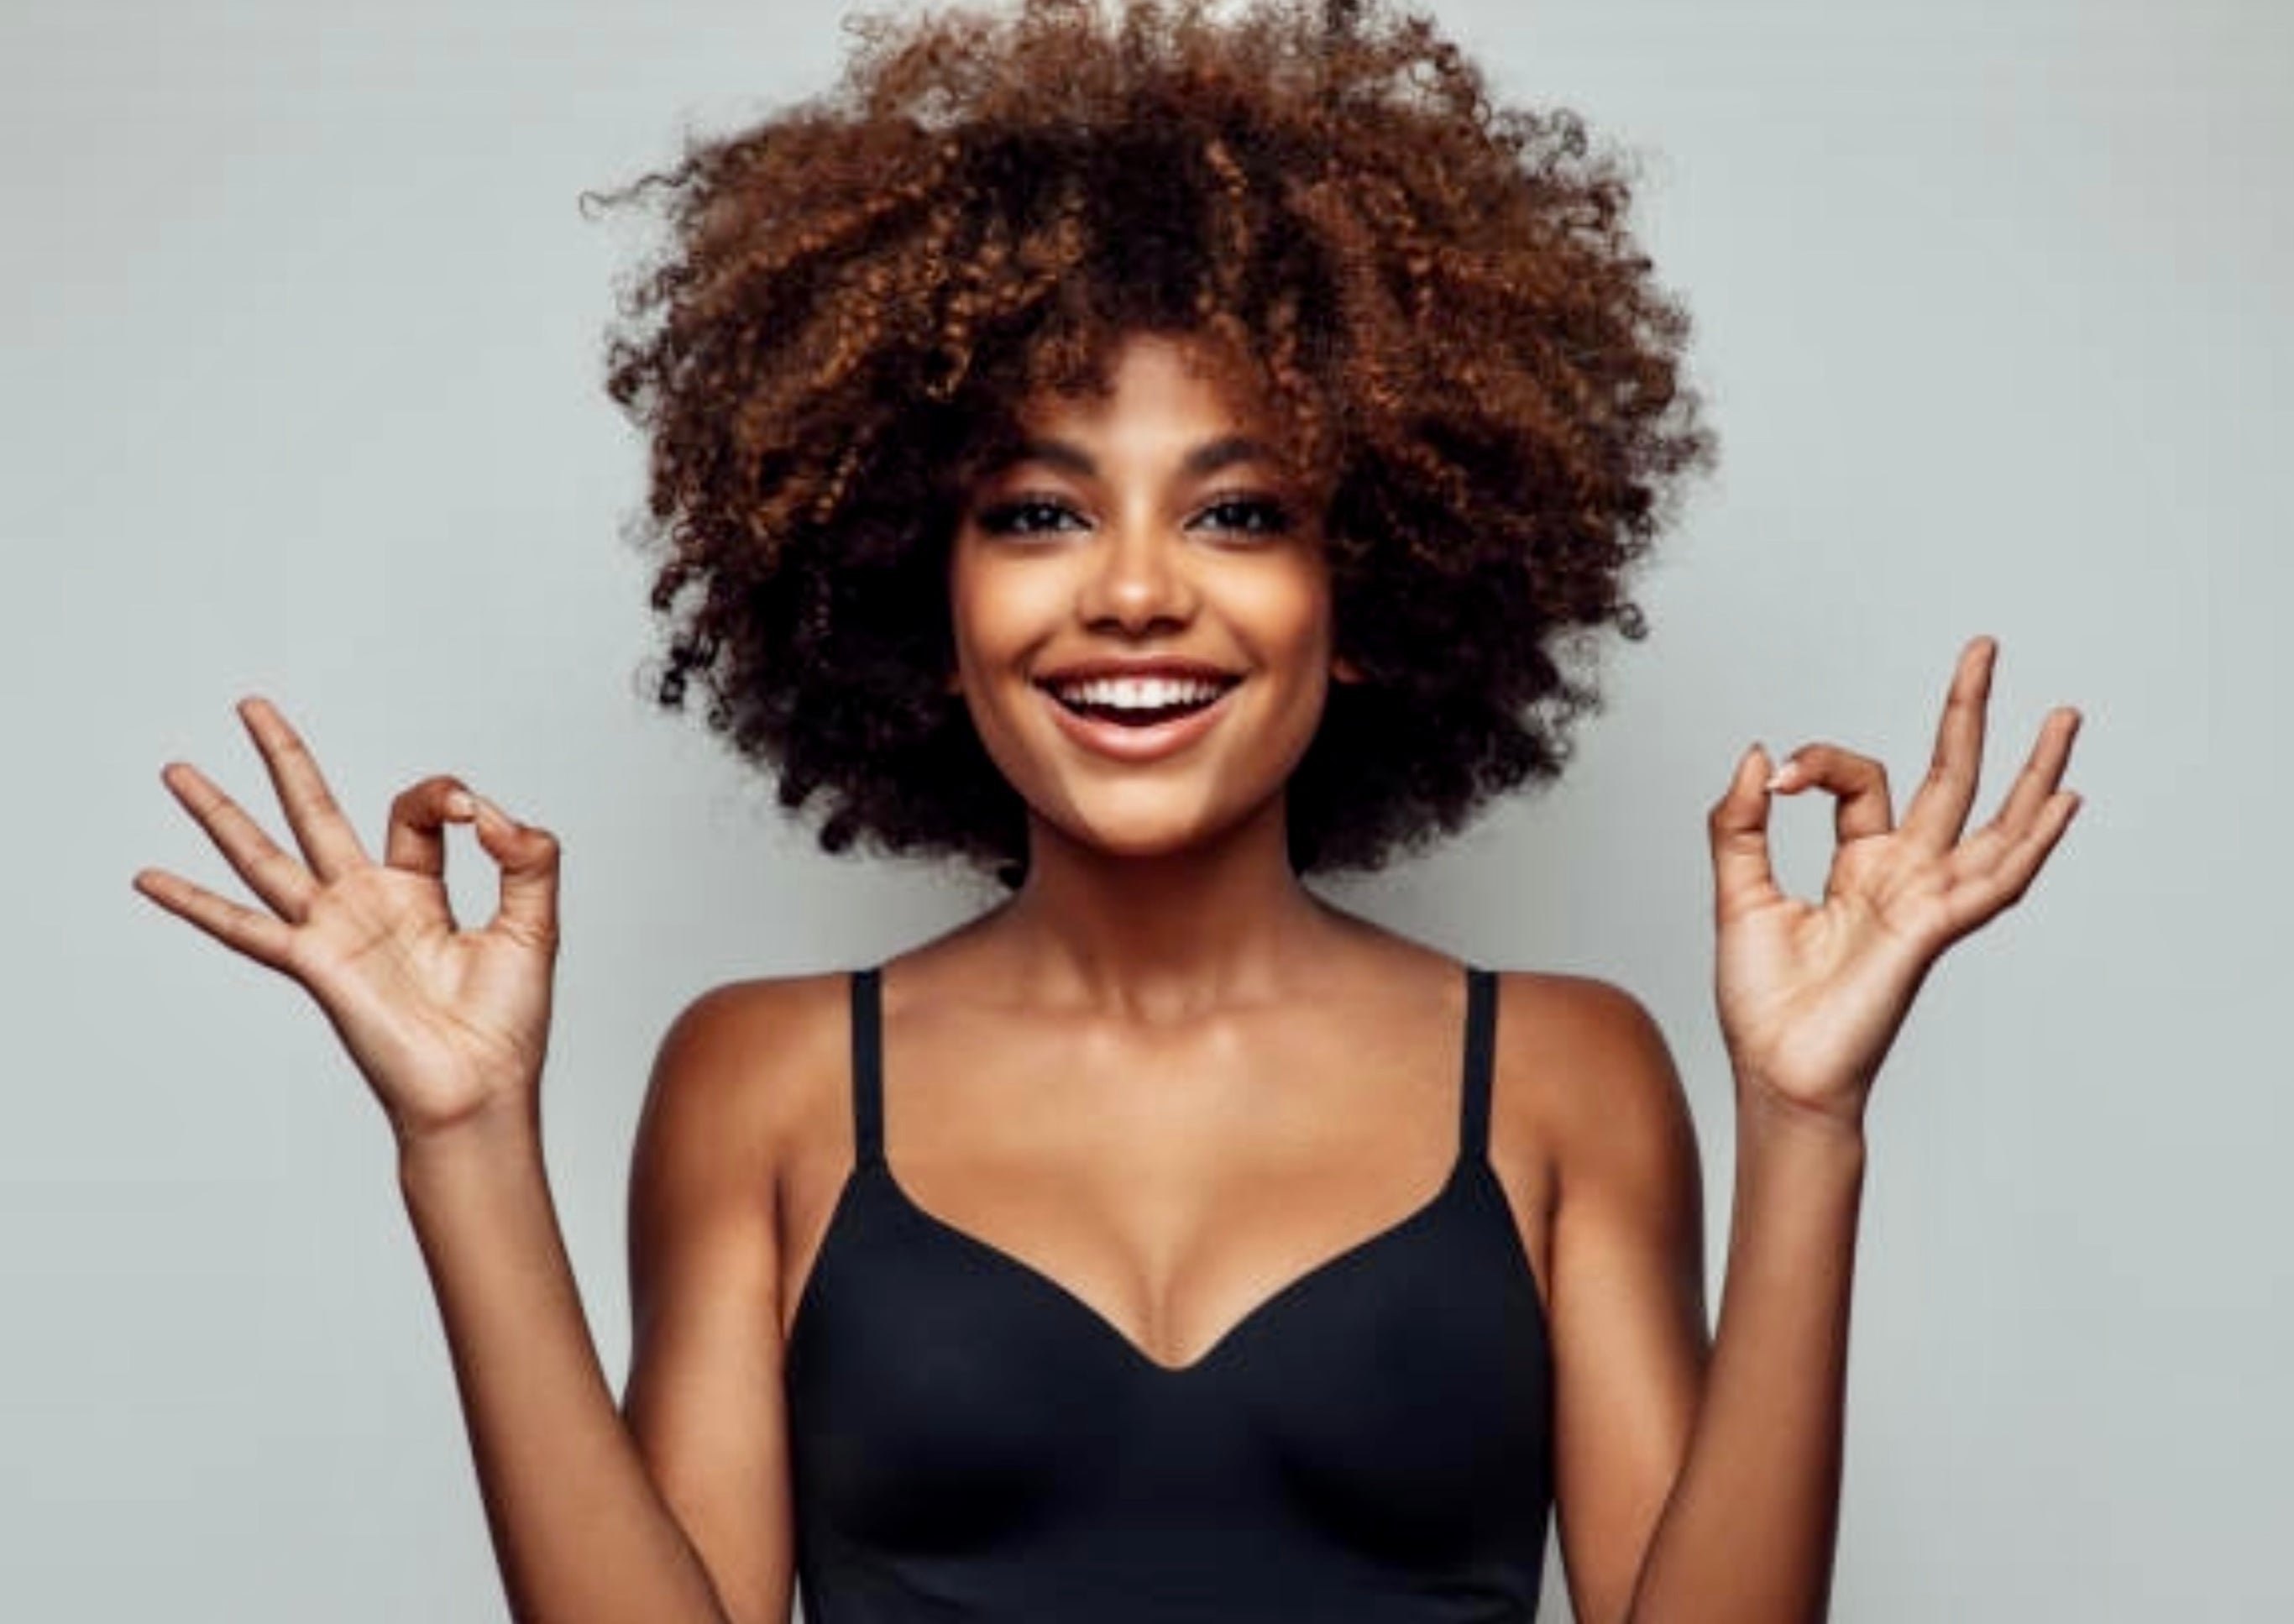 Female model with bouncy curly hair smiling posing at camera with both hands gesturing okay symbol 